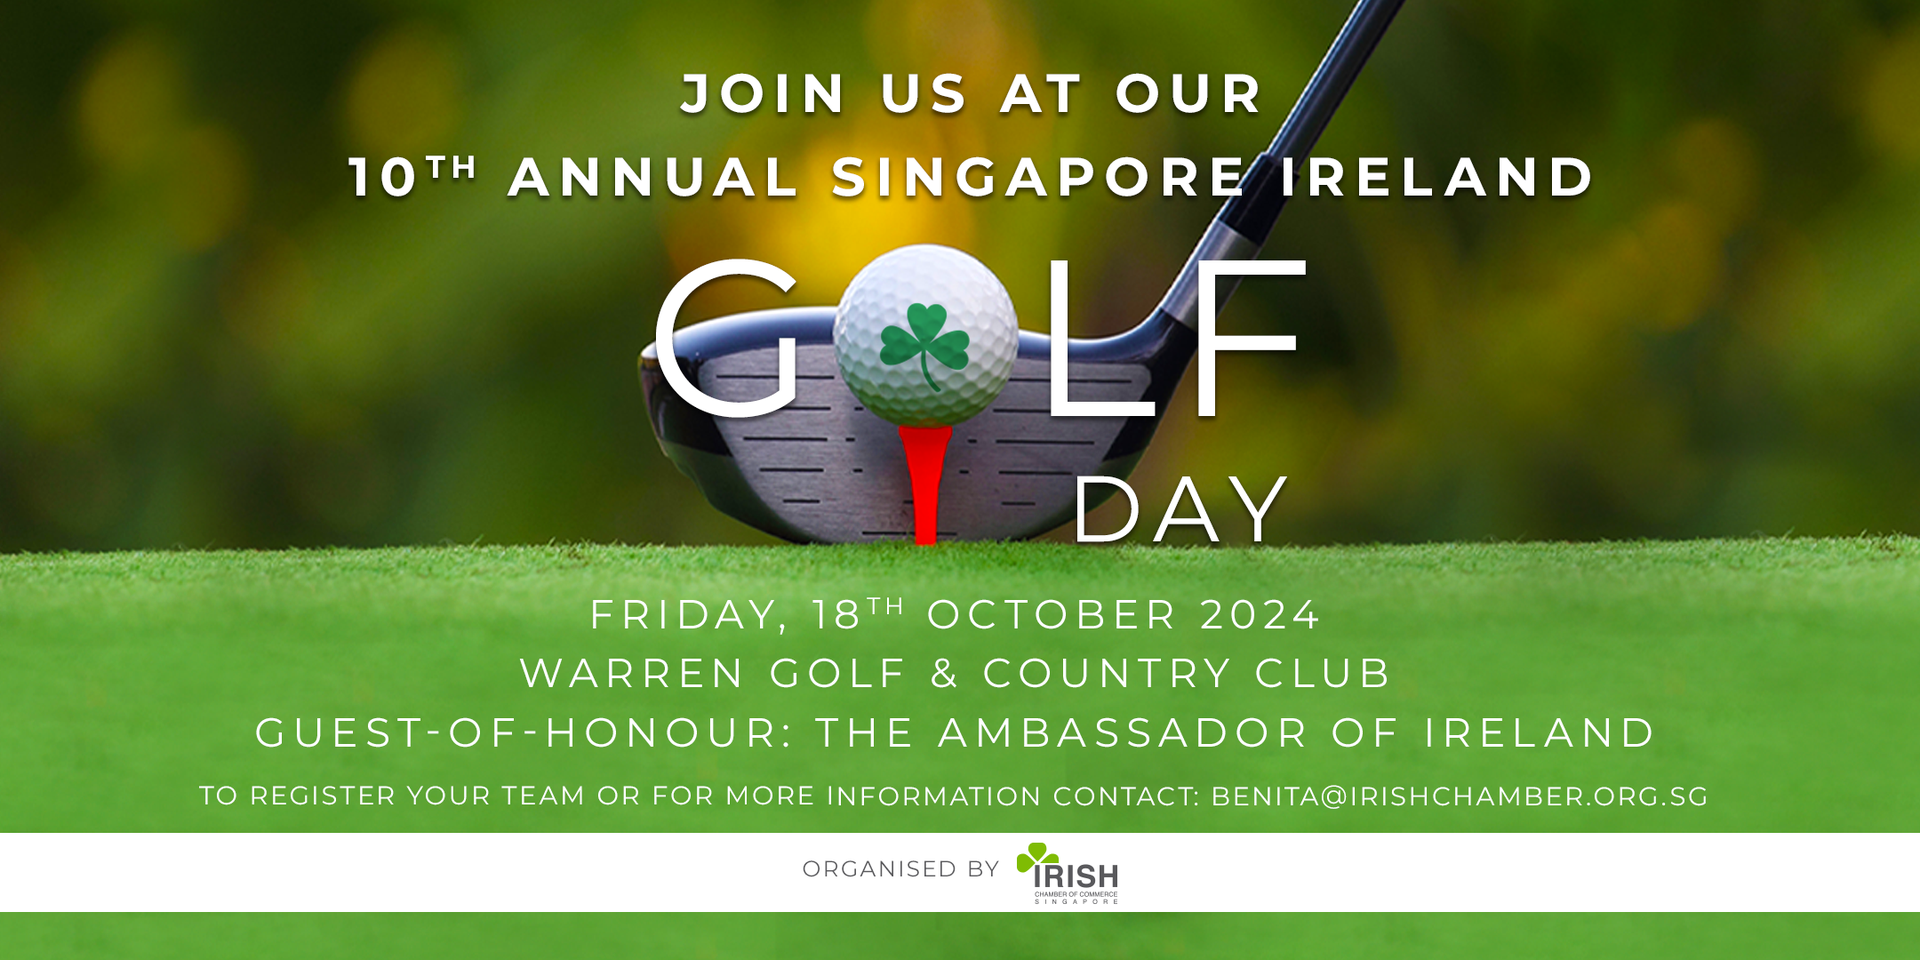 thumbnails Tee off at the 10th Annual Singapore Ireland Golf Day - 18th October 2024